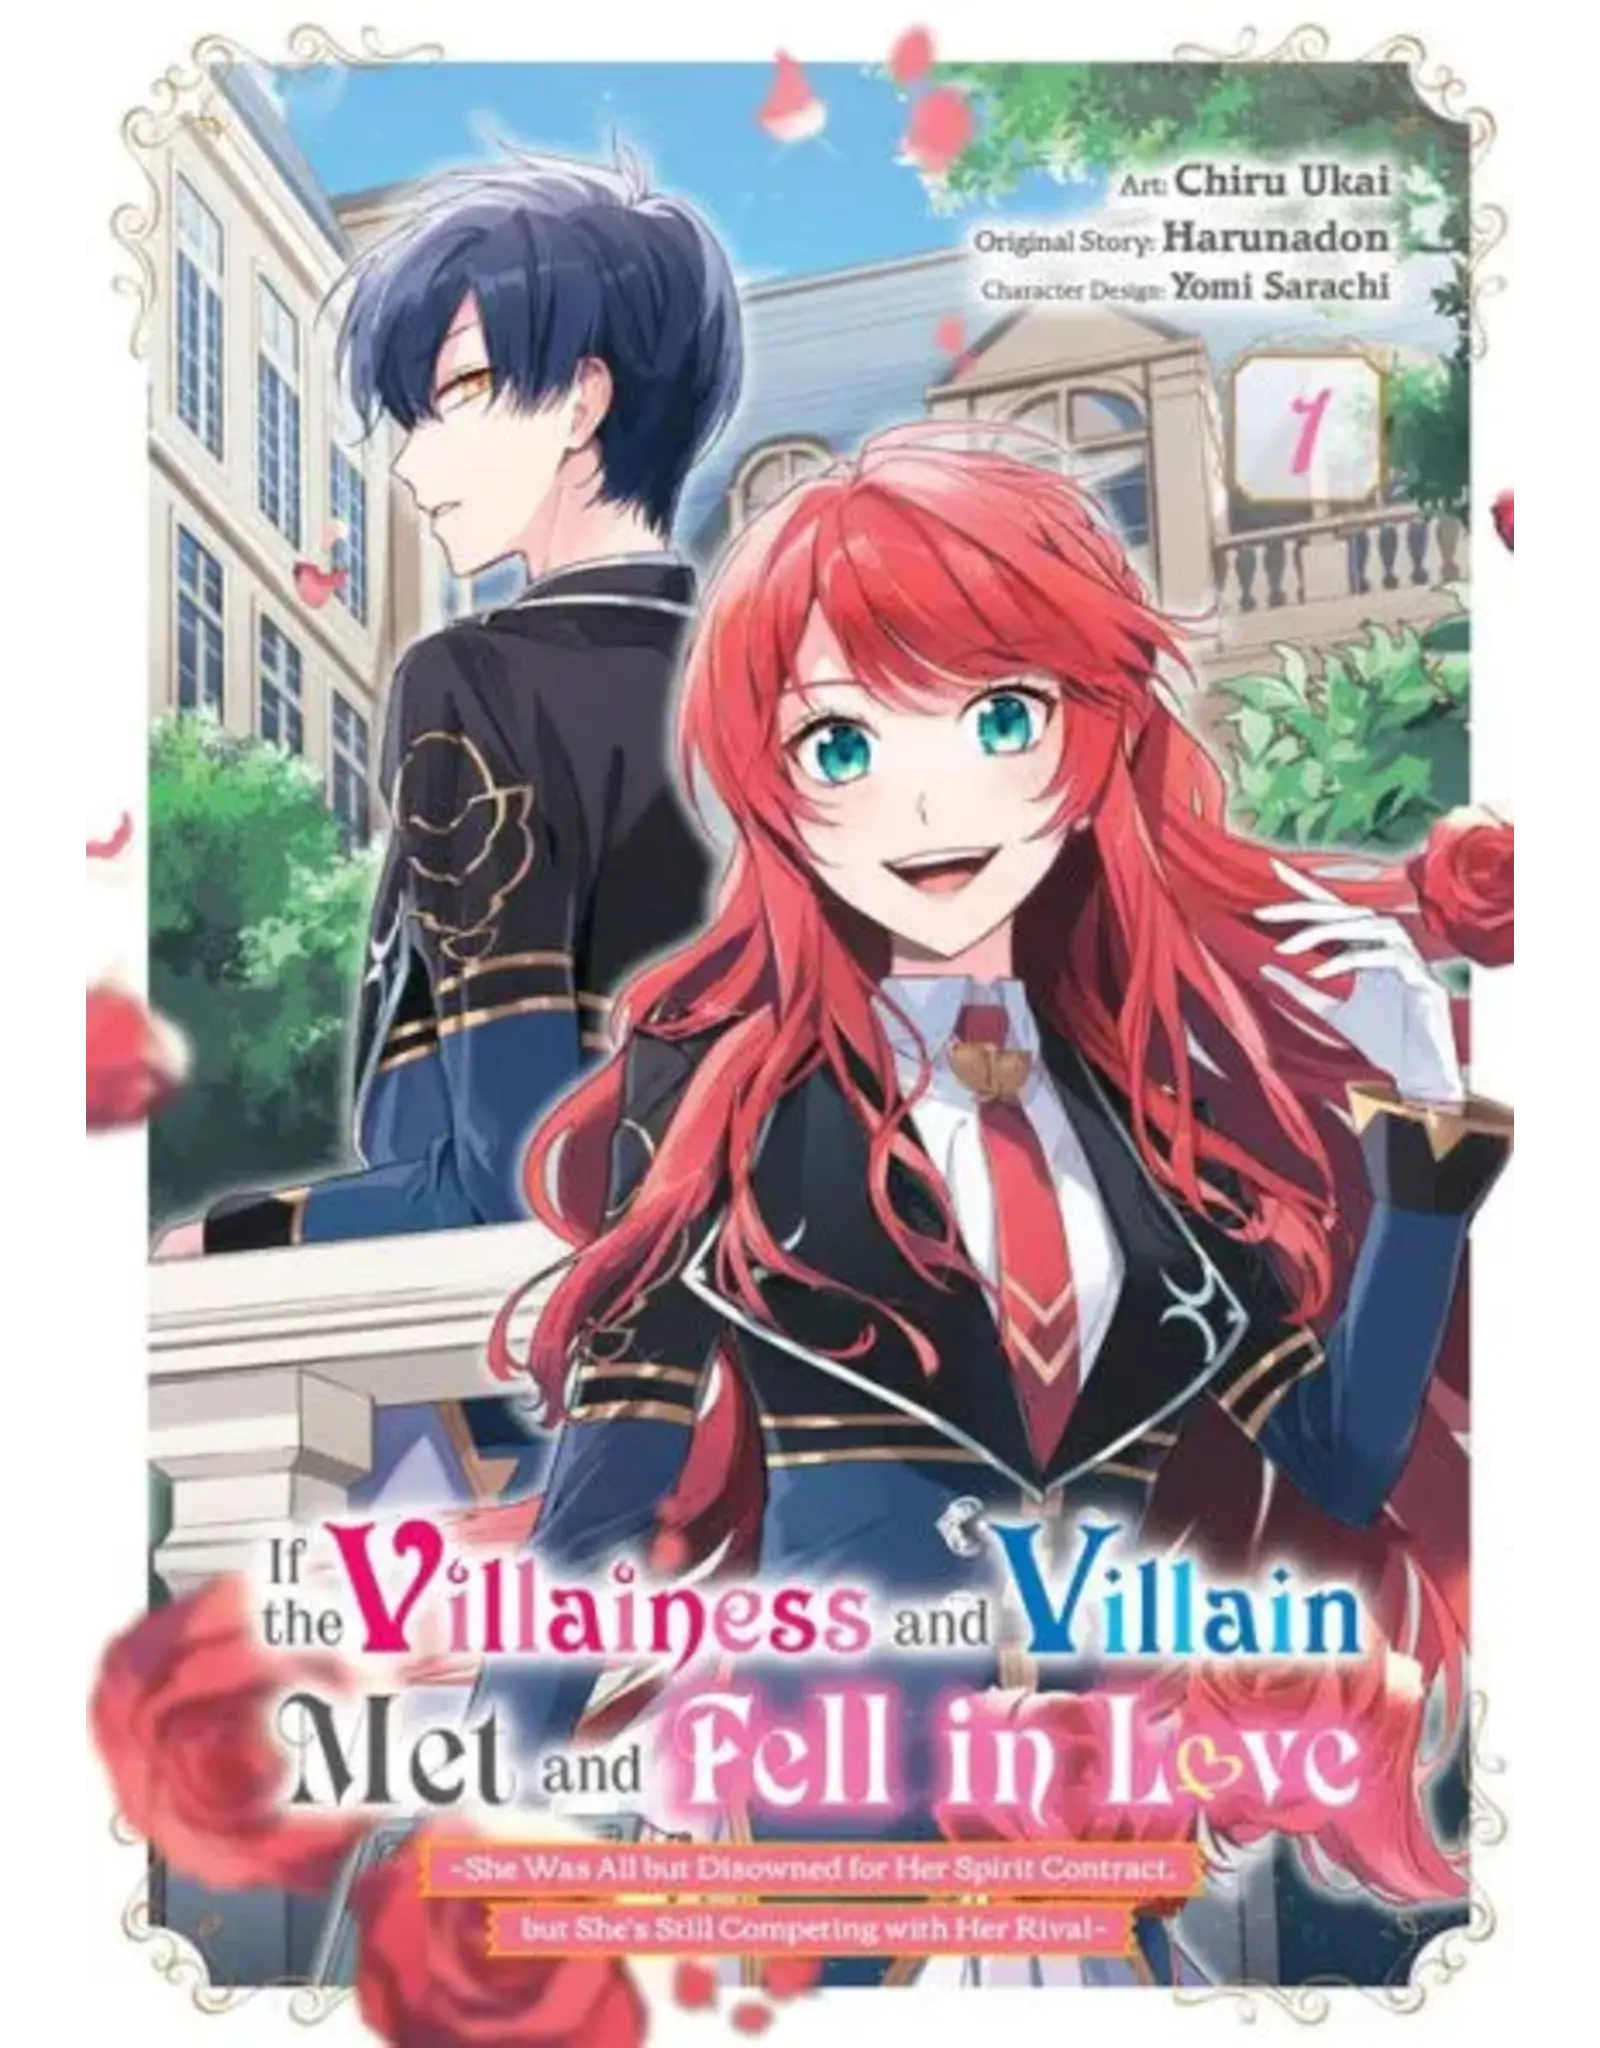 The Villainess and Villain Met and Fell in Love Vol. 1 Manga